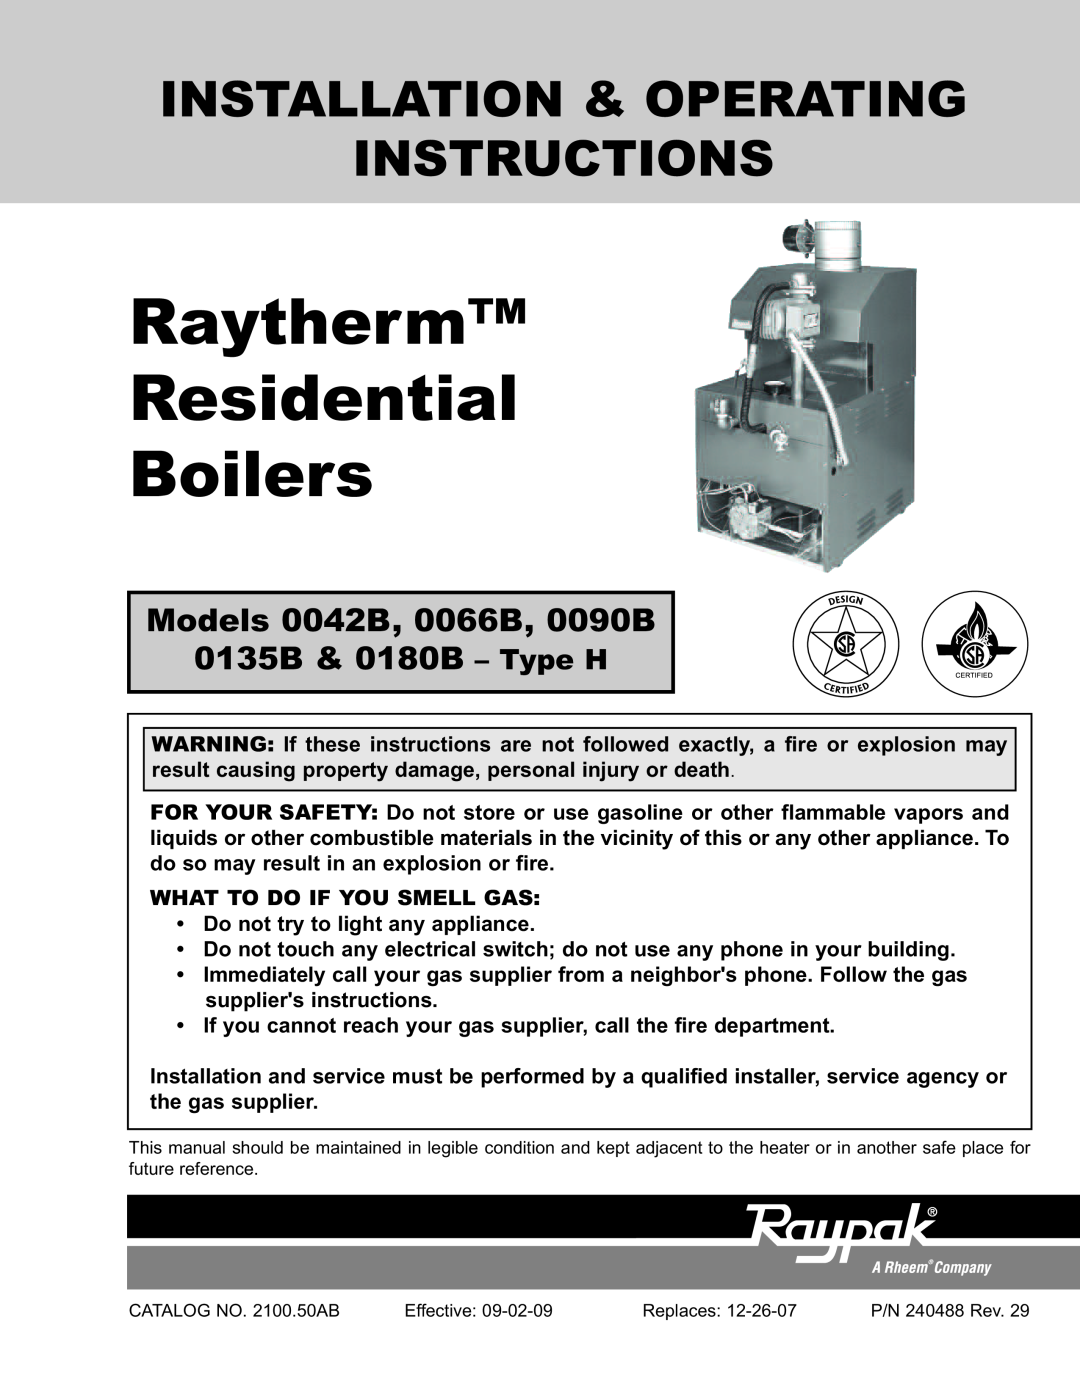 Raypak manual RaythermTM Type H RESIDENTIAL BOILERS Models, 0042B, 0066B,0090B 0135B, 0180B, For Your Safety 